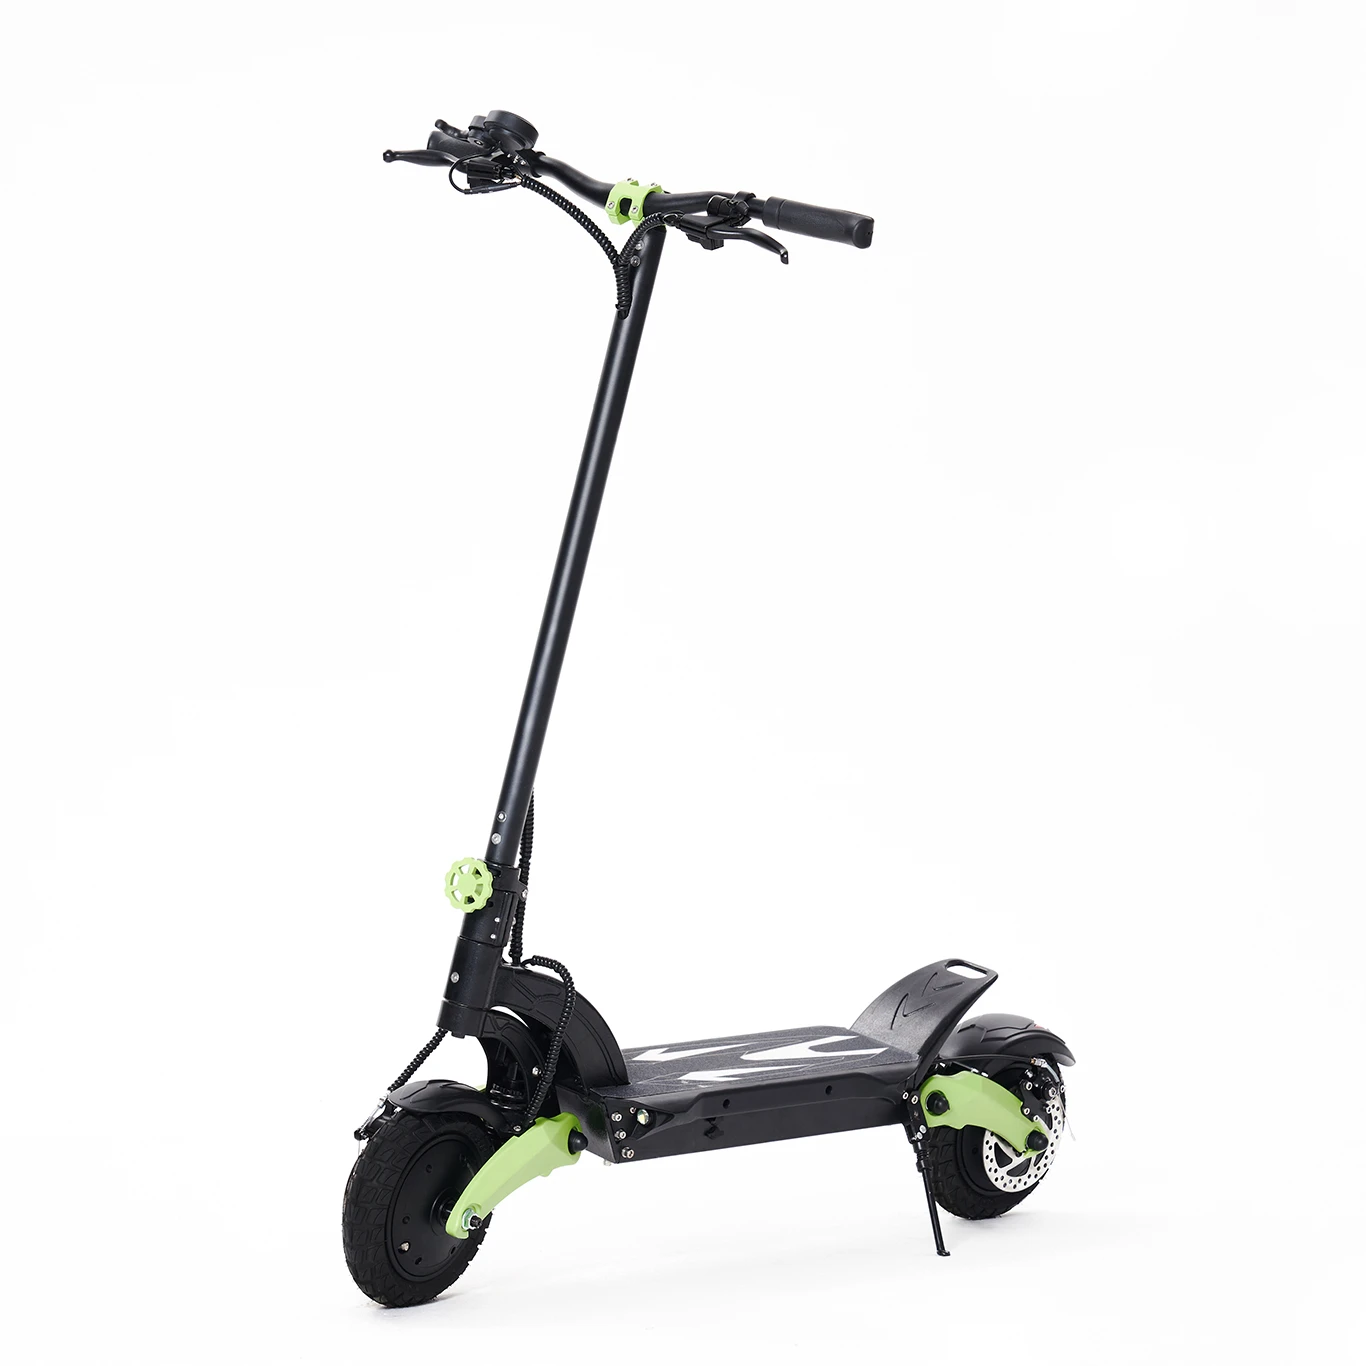 

Pro Smart Self Balancing Folding Electric 2 Wheels Scooter for Adults, Customized color